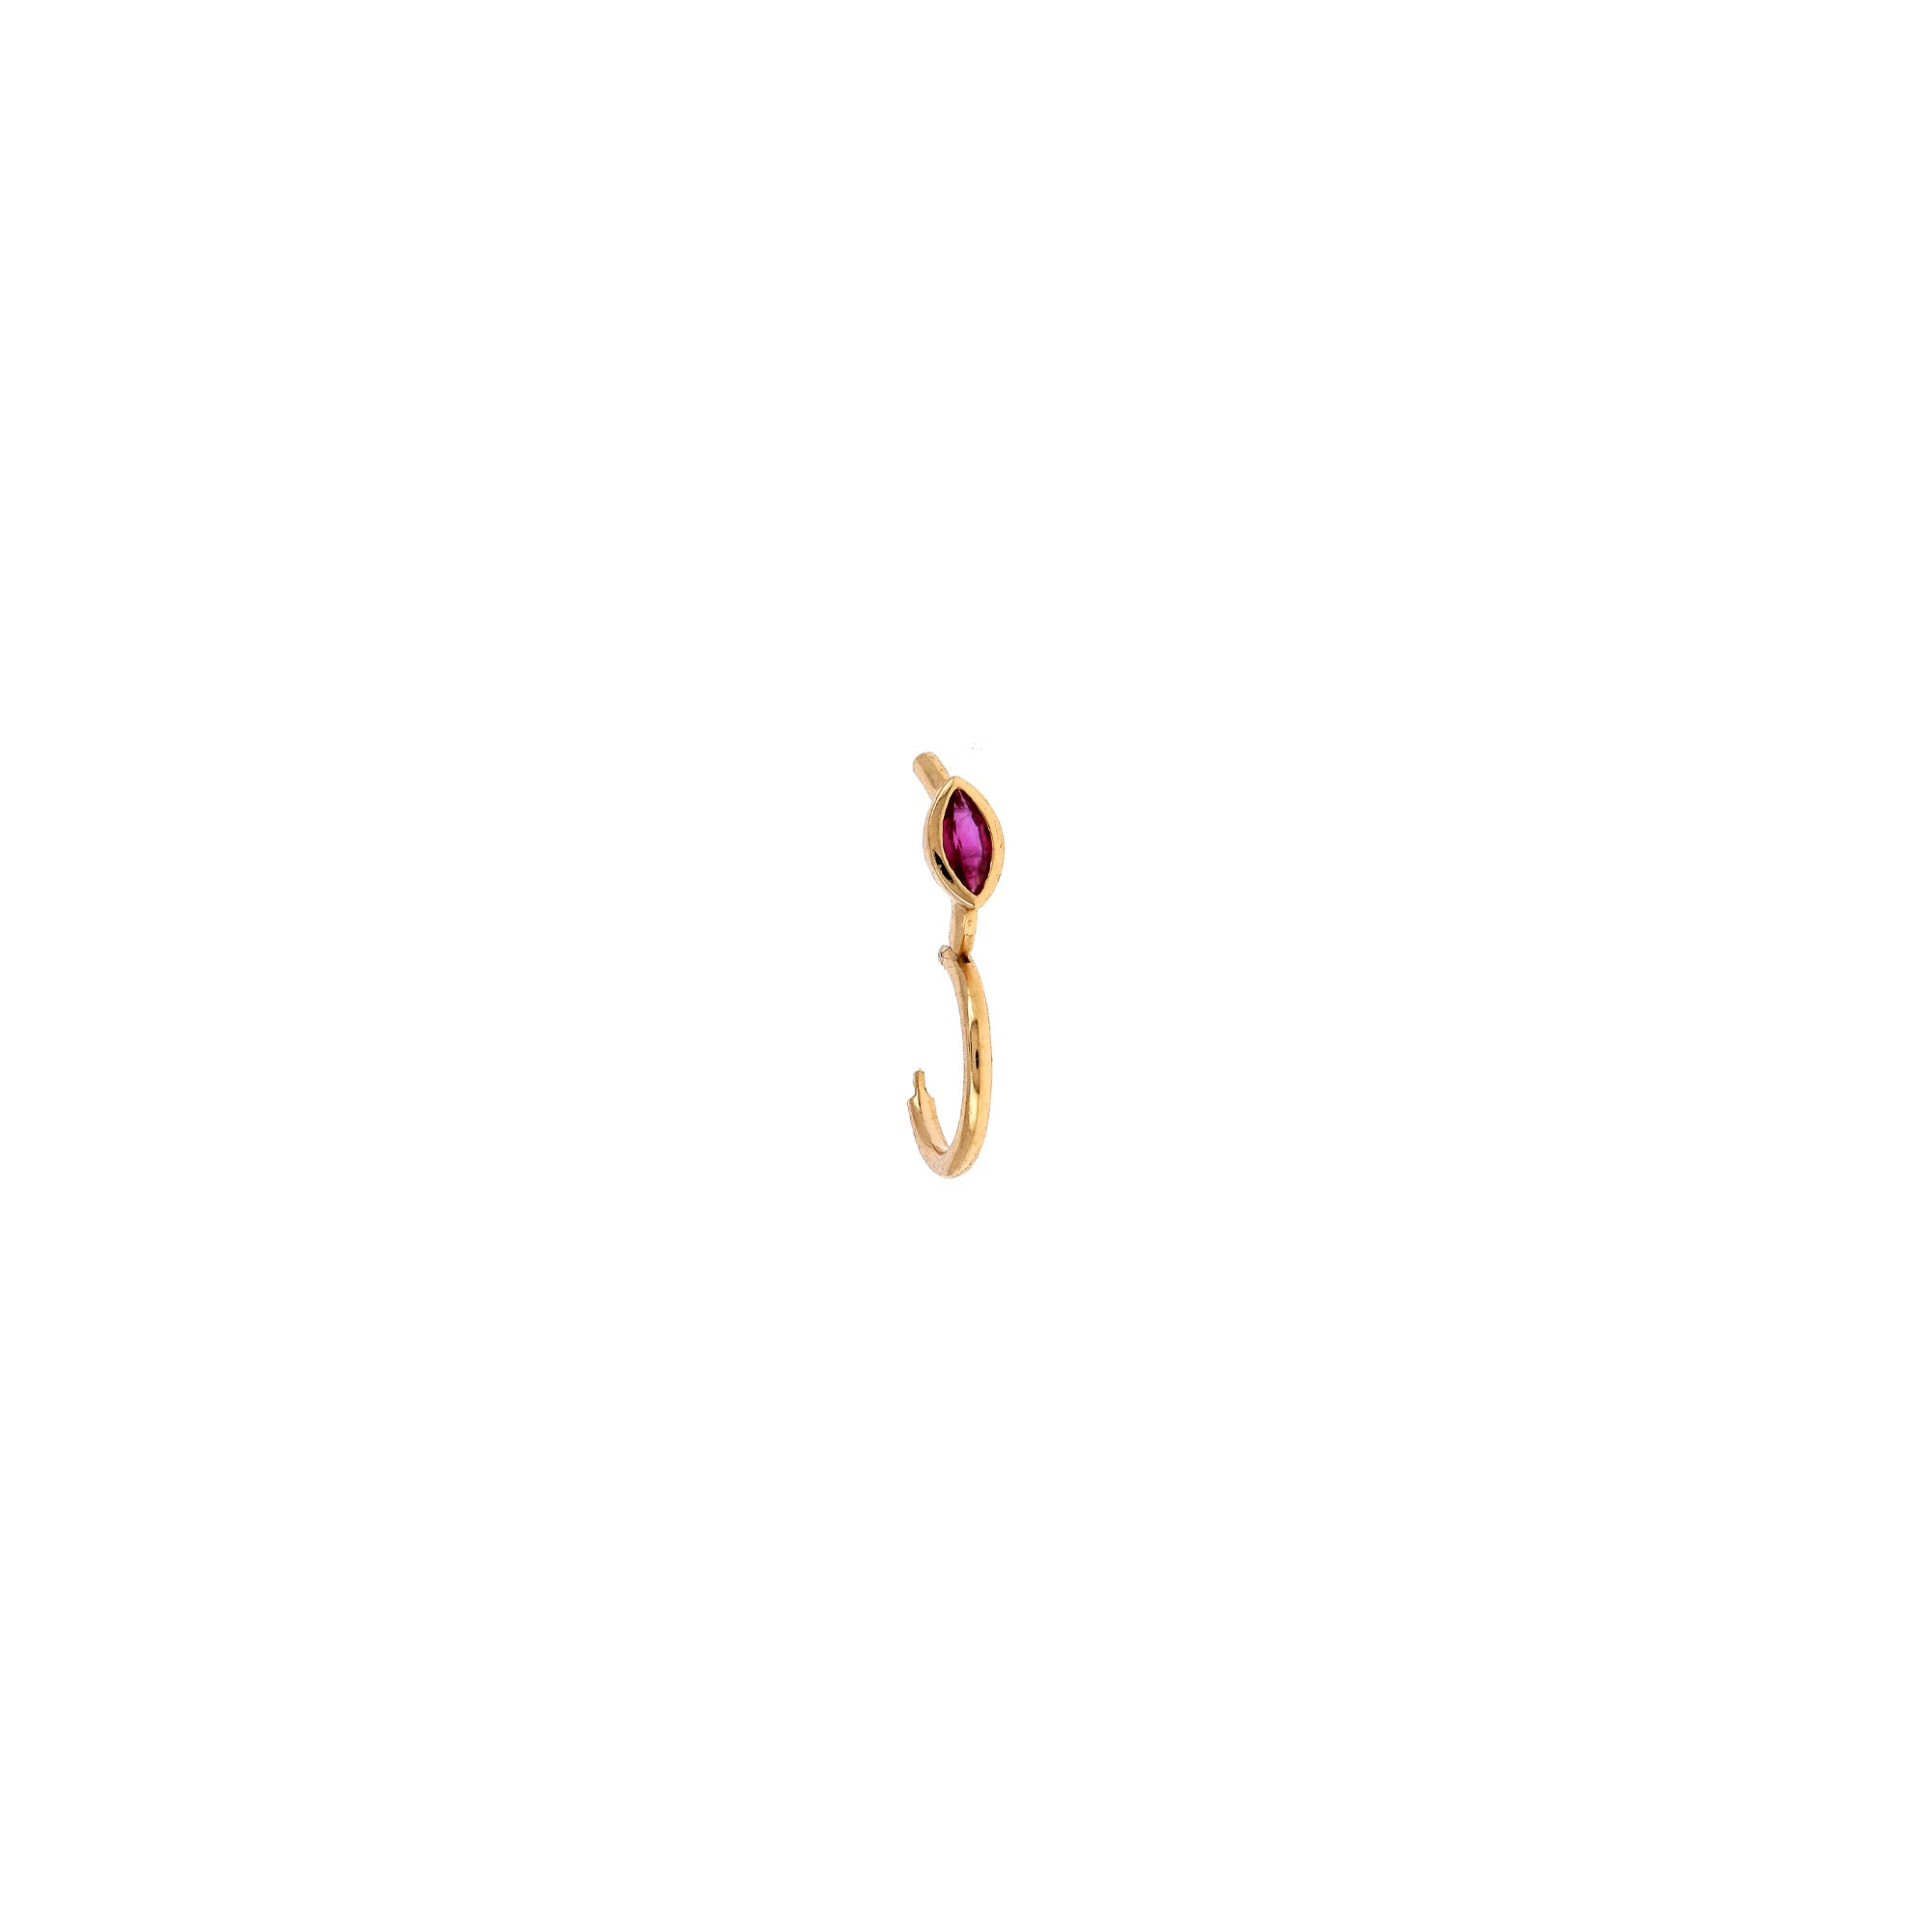 6.5mm Ruby Marquise 3x2mm Rose Gold Hoop